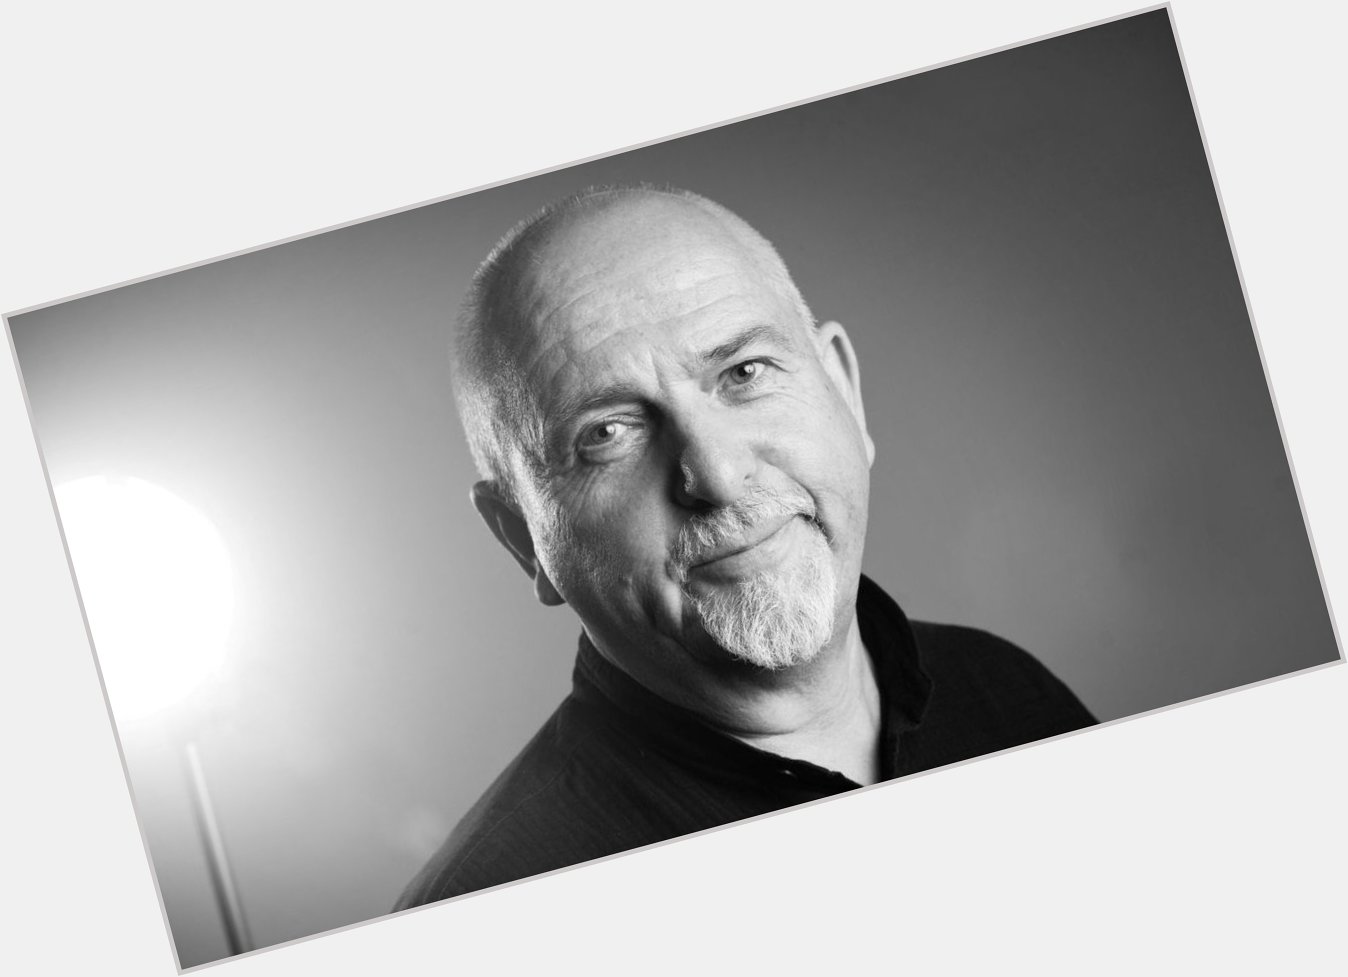 Happy birthday to Peter Gabriel, who is 67 today! 